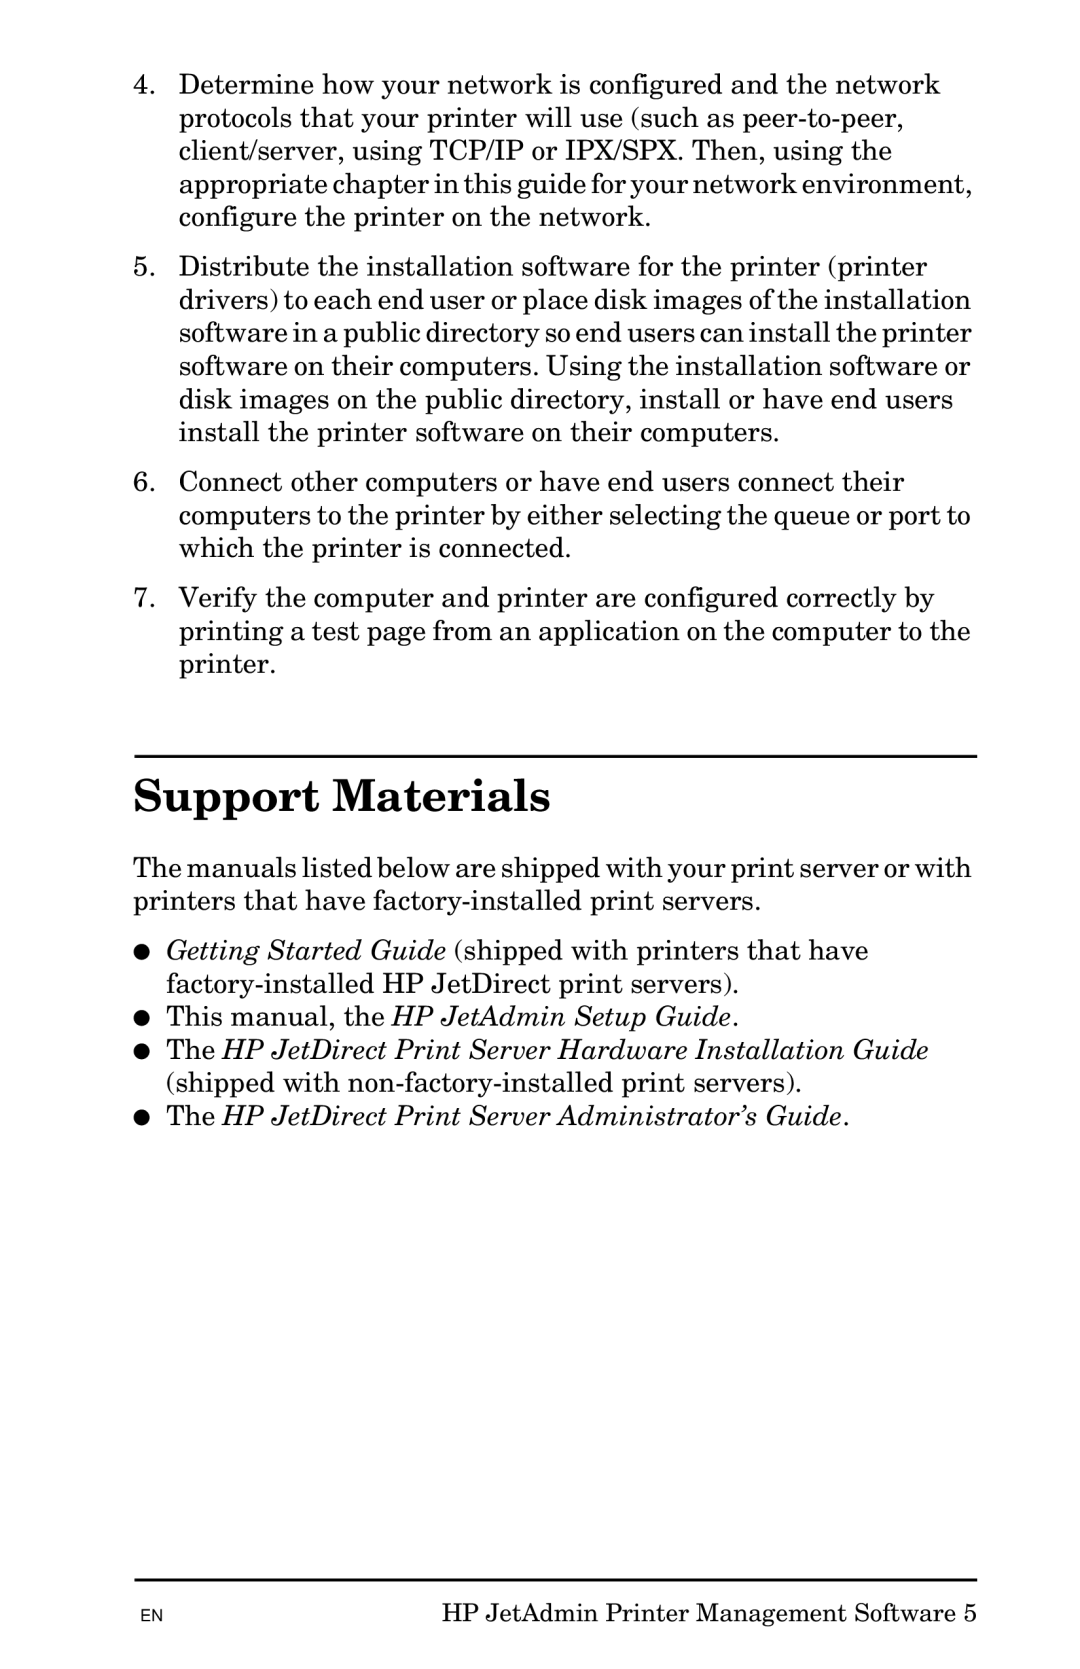 HP Jetadmin Software for OS/2 manual Support Materials 